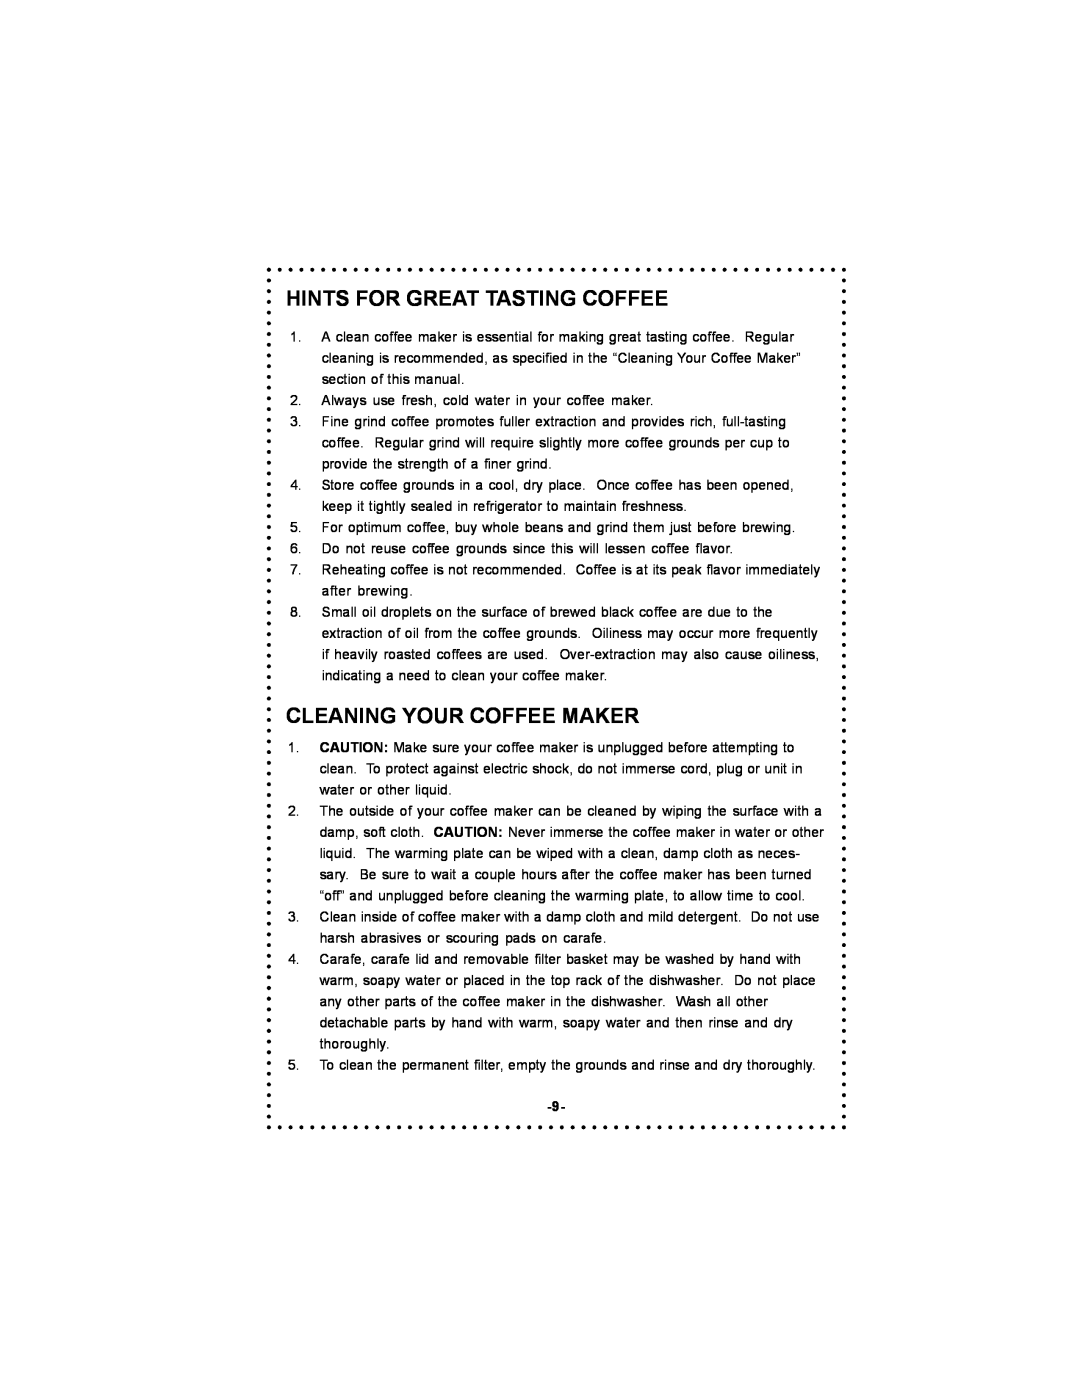 DeLonghi DC50T instruction manual Hints For Great Tasting Coffee, Cleaning Your Coffee Maker 